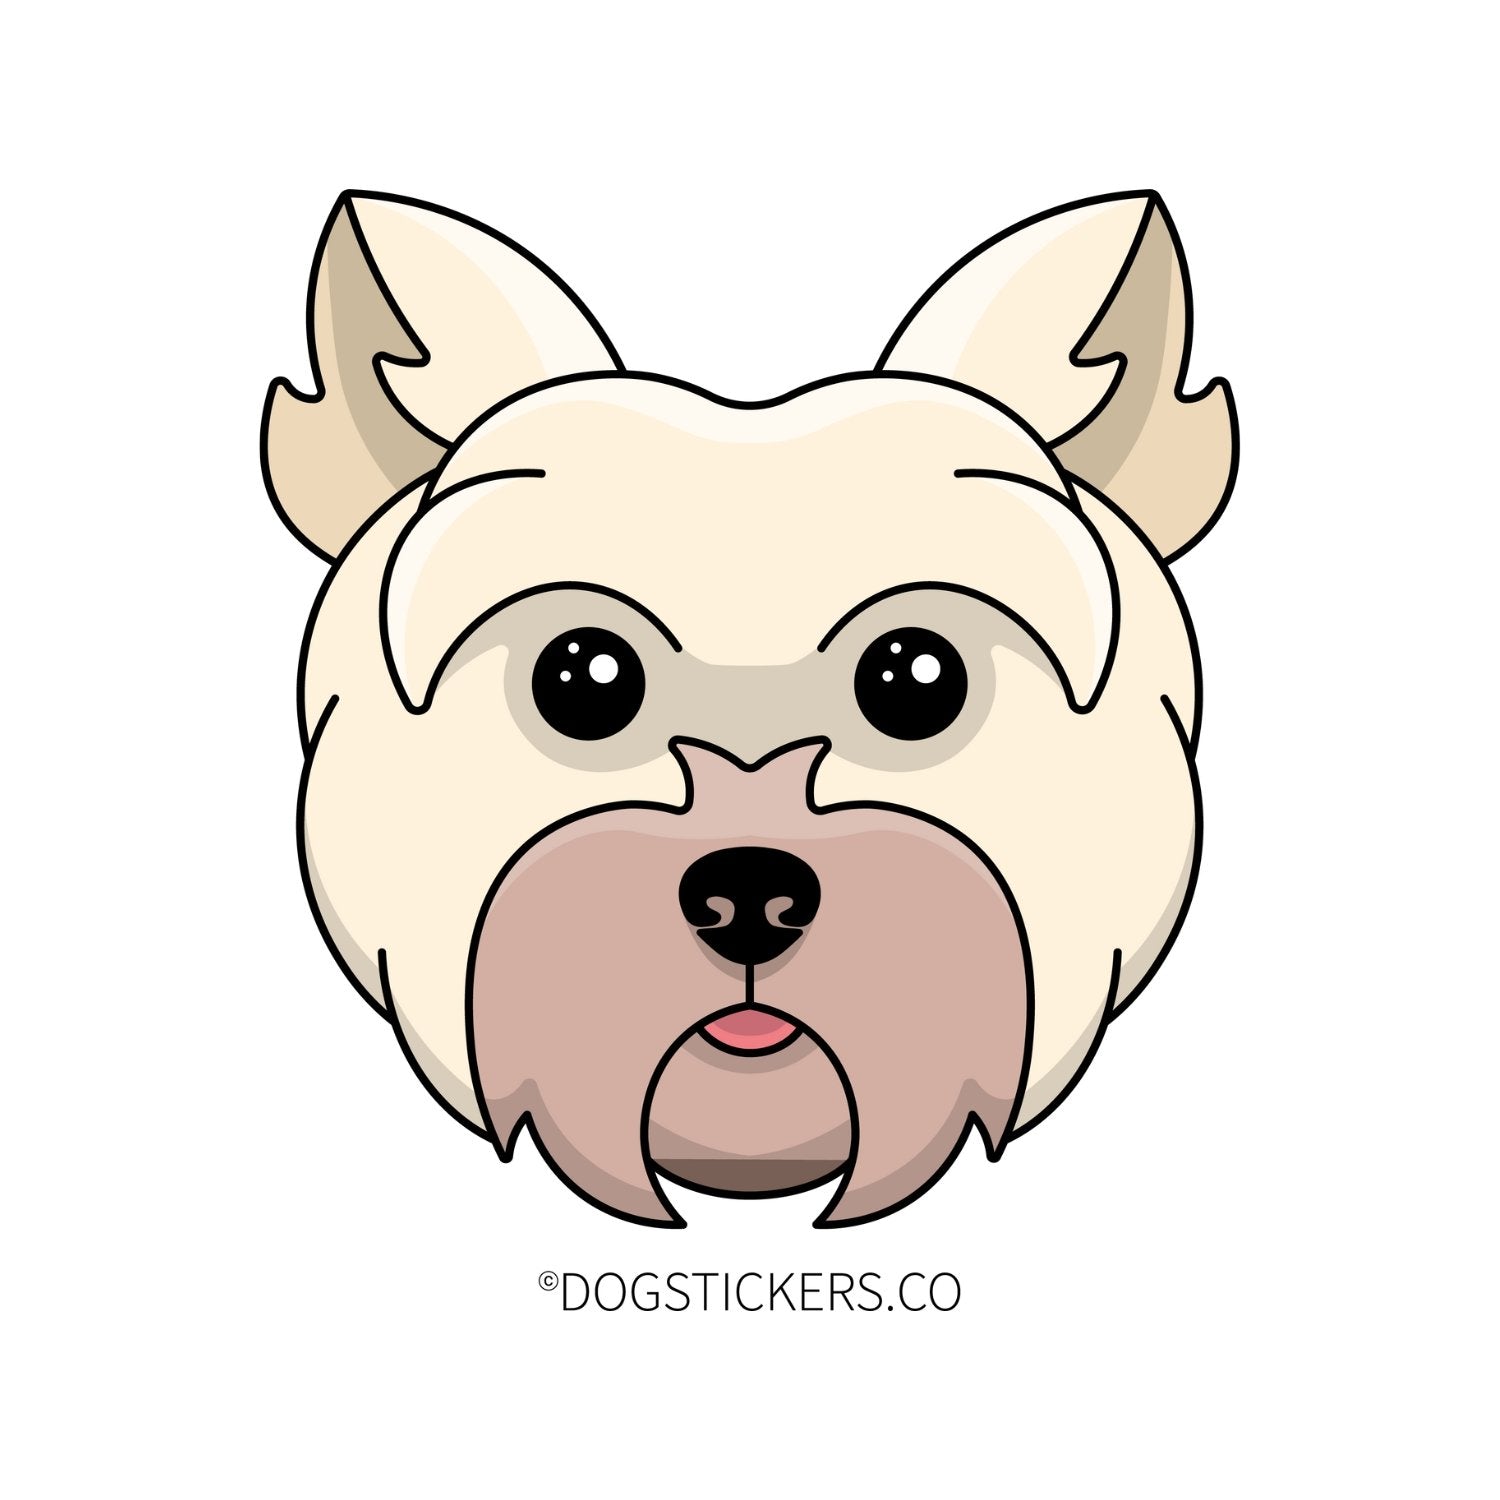 Cairn Terrier - Dogstickers.co